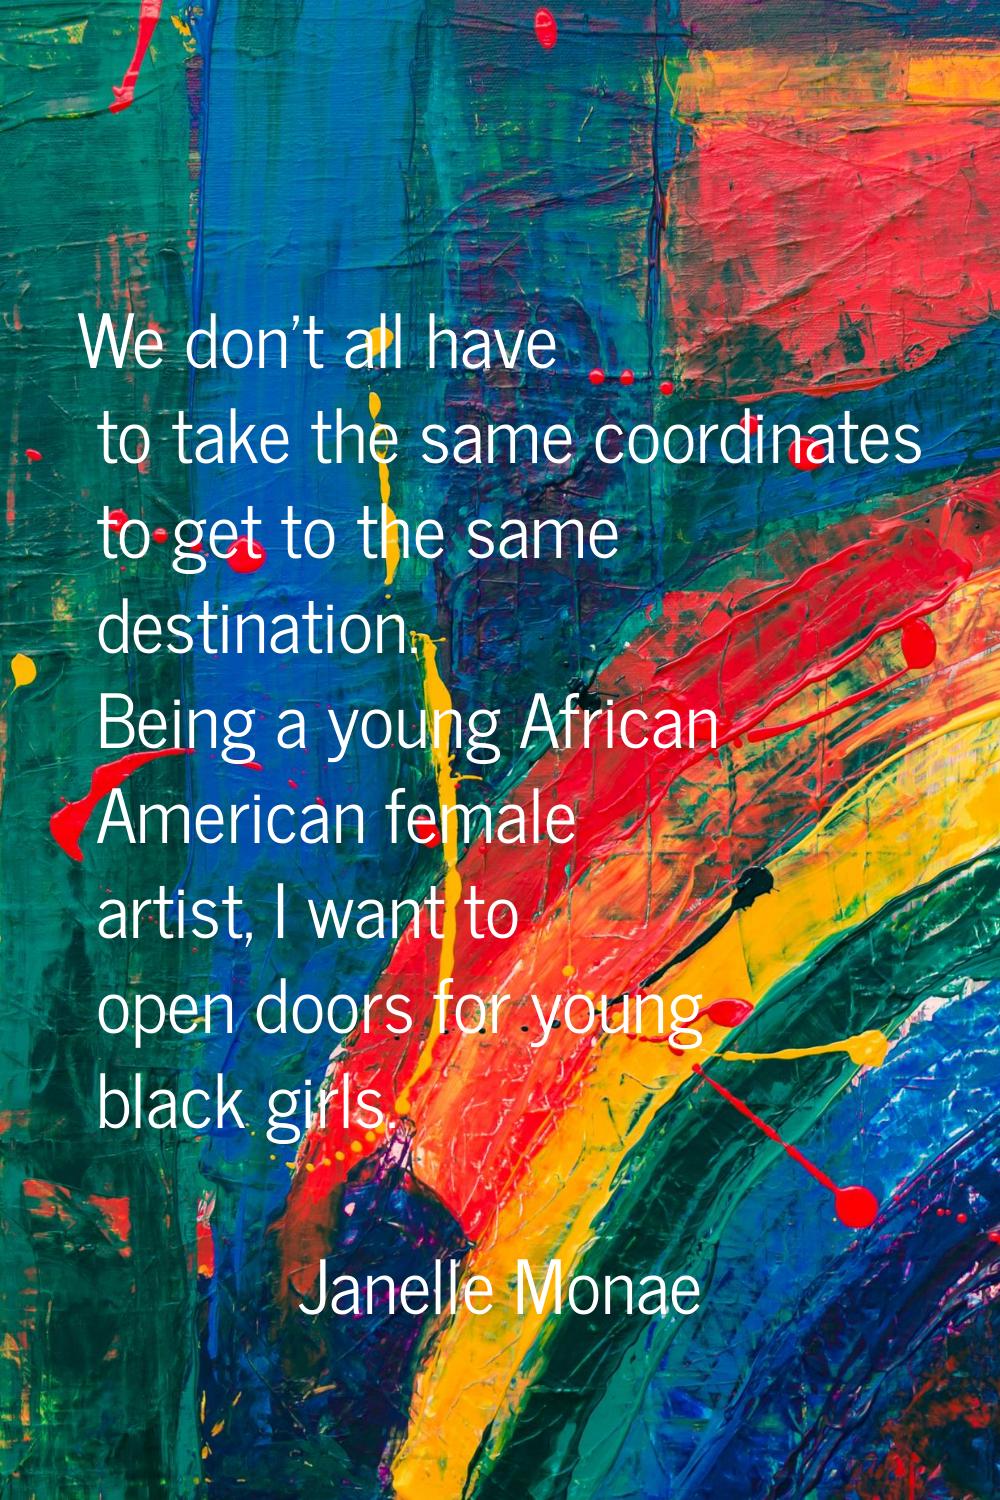 We don't all have to take the same coordinates to get to the same destination. Being a young Africa